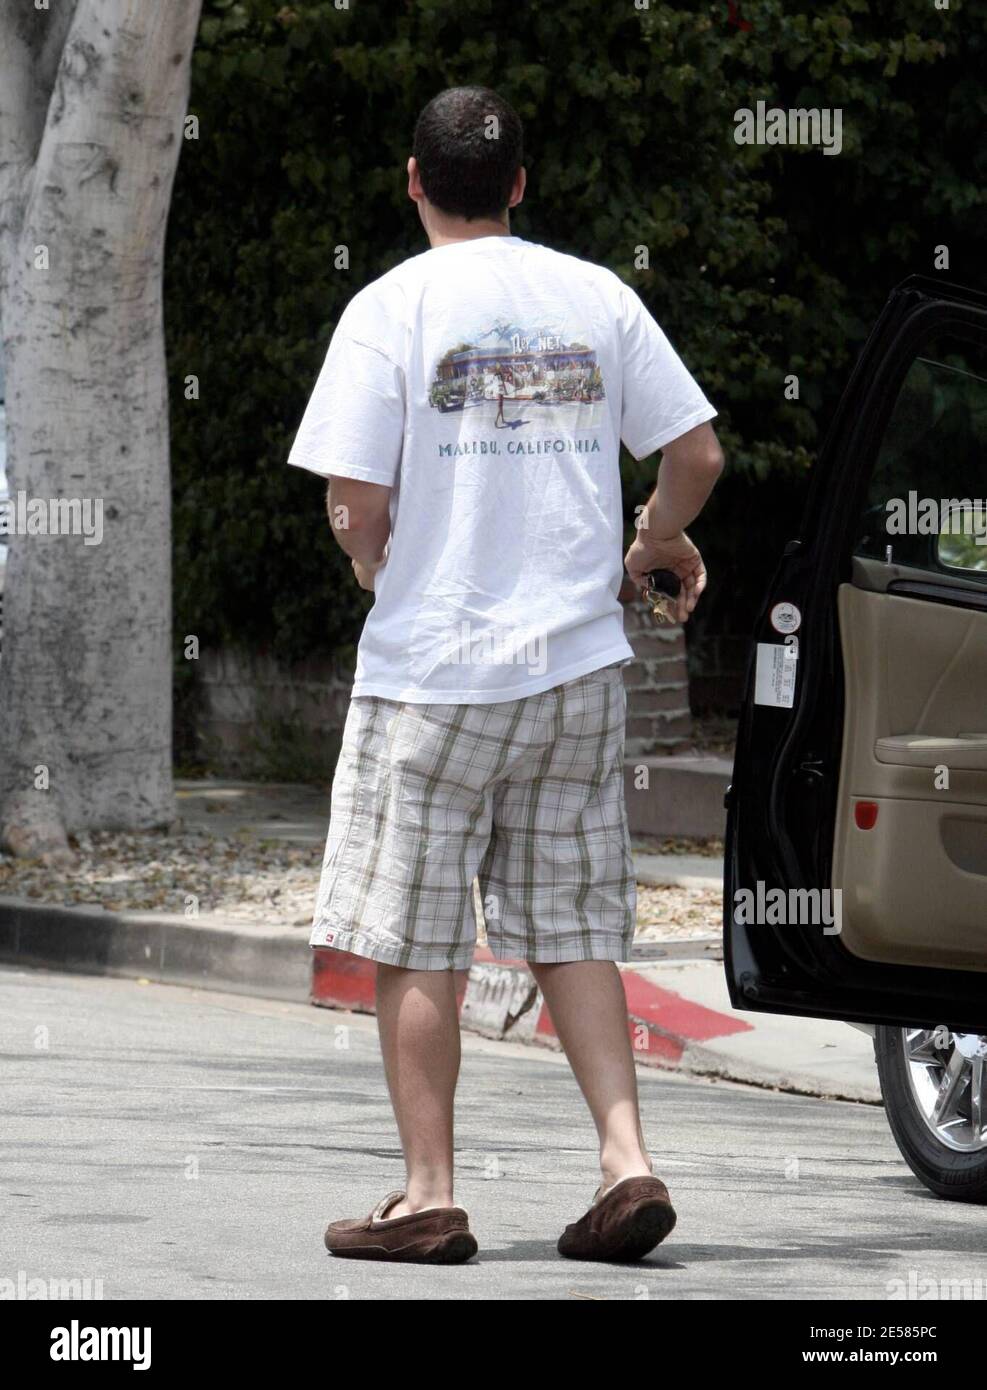 Exclusive!! Adam Sandler steps out with his daughter, Sadie Madison, who  just turned one year old this month. Sandler was sporting a pair of  slippers, shorts and a Malibu t-shirt. Los Angeles,